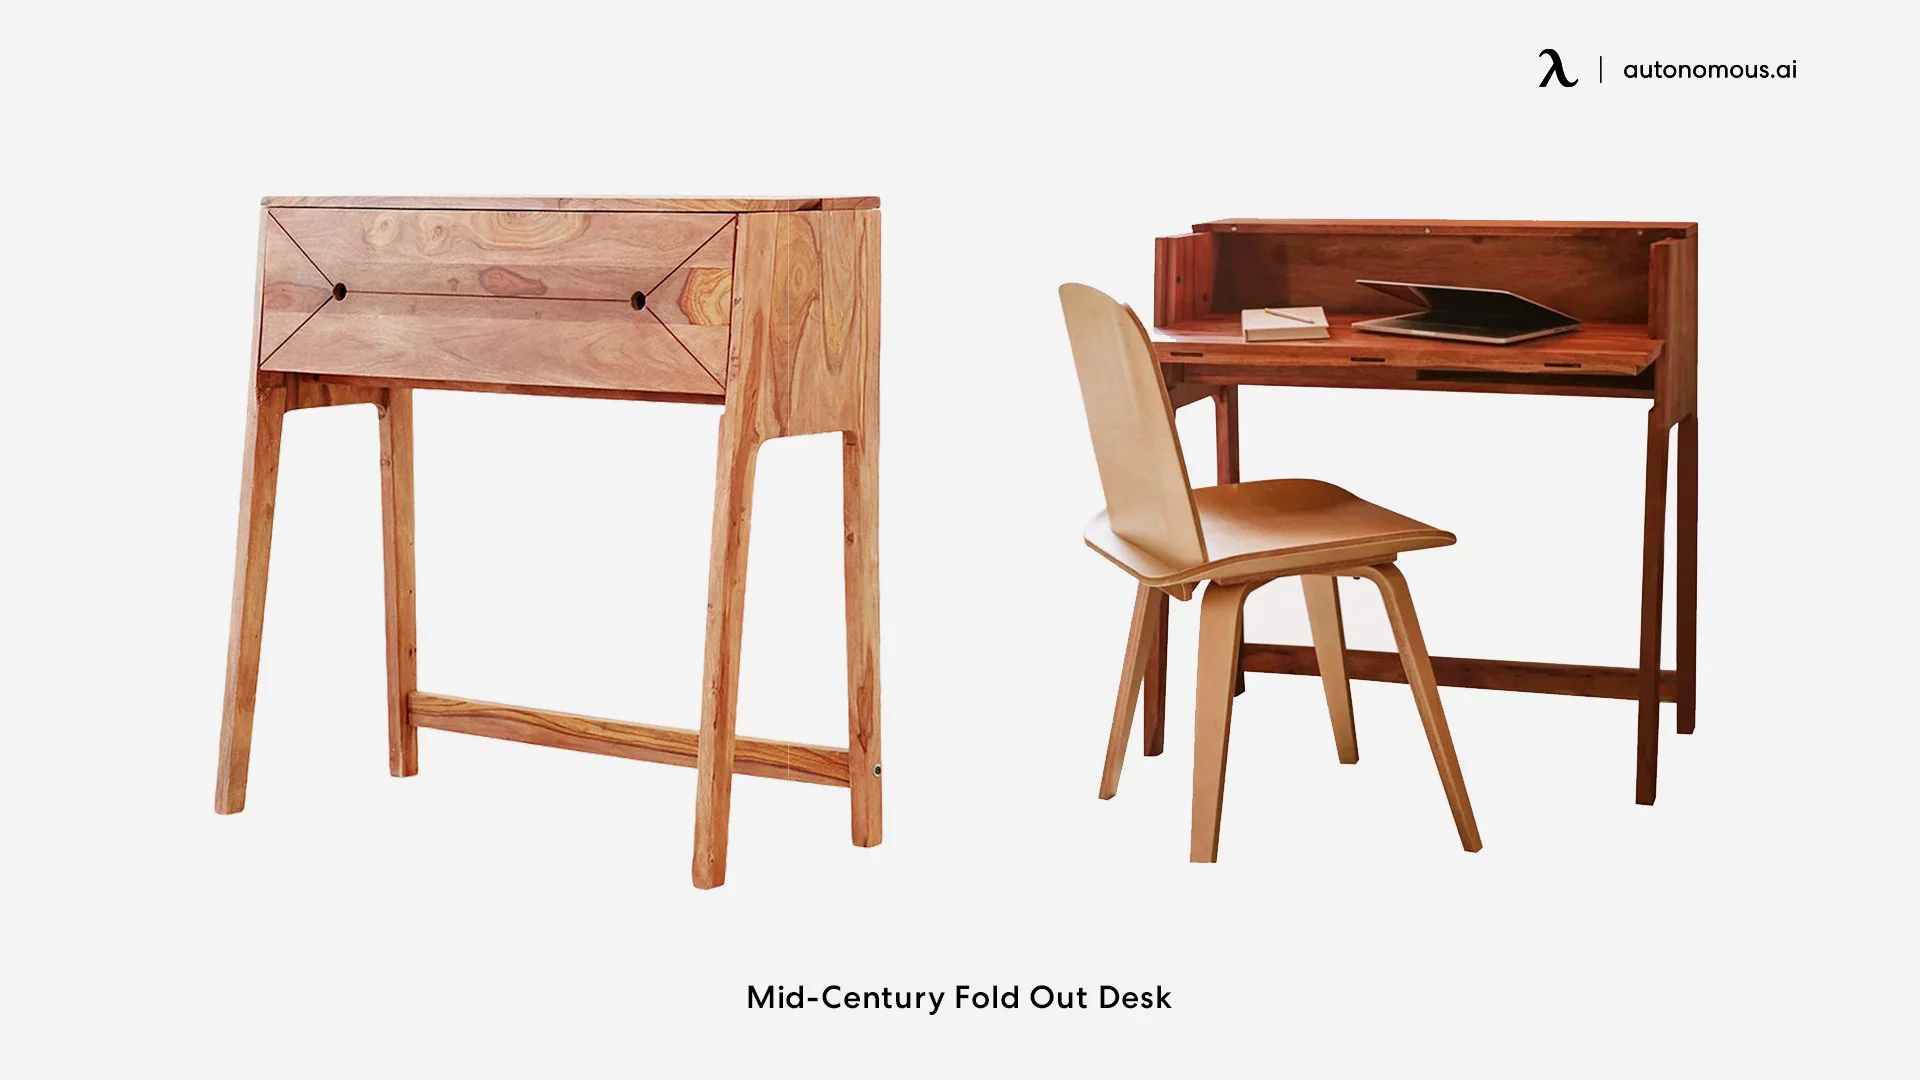 Mid-Century Fold-Out Desk